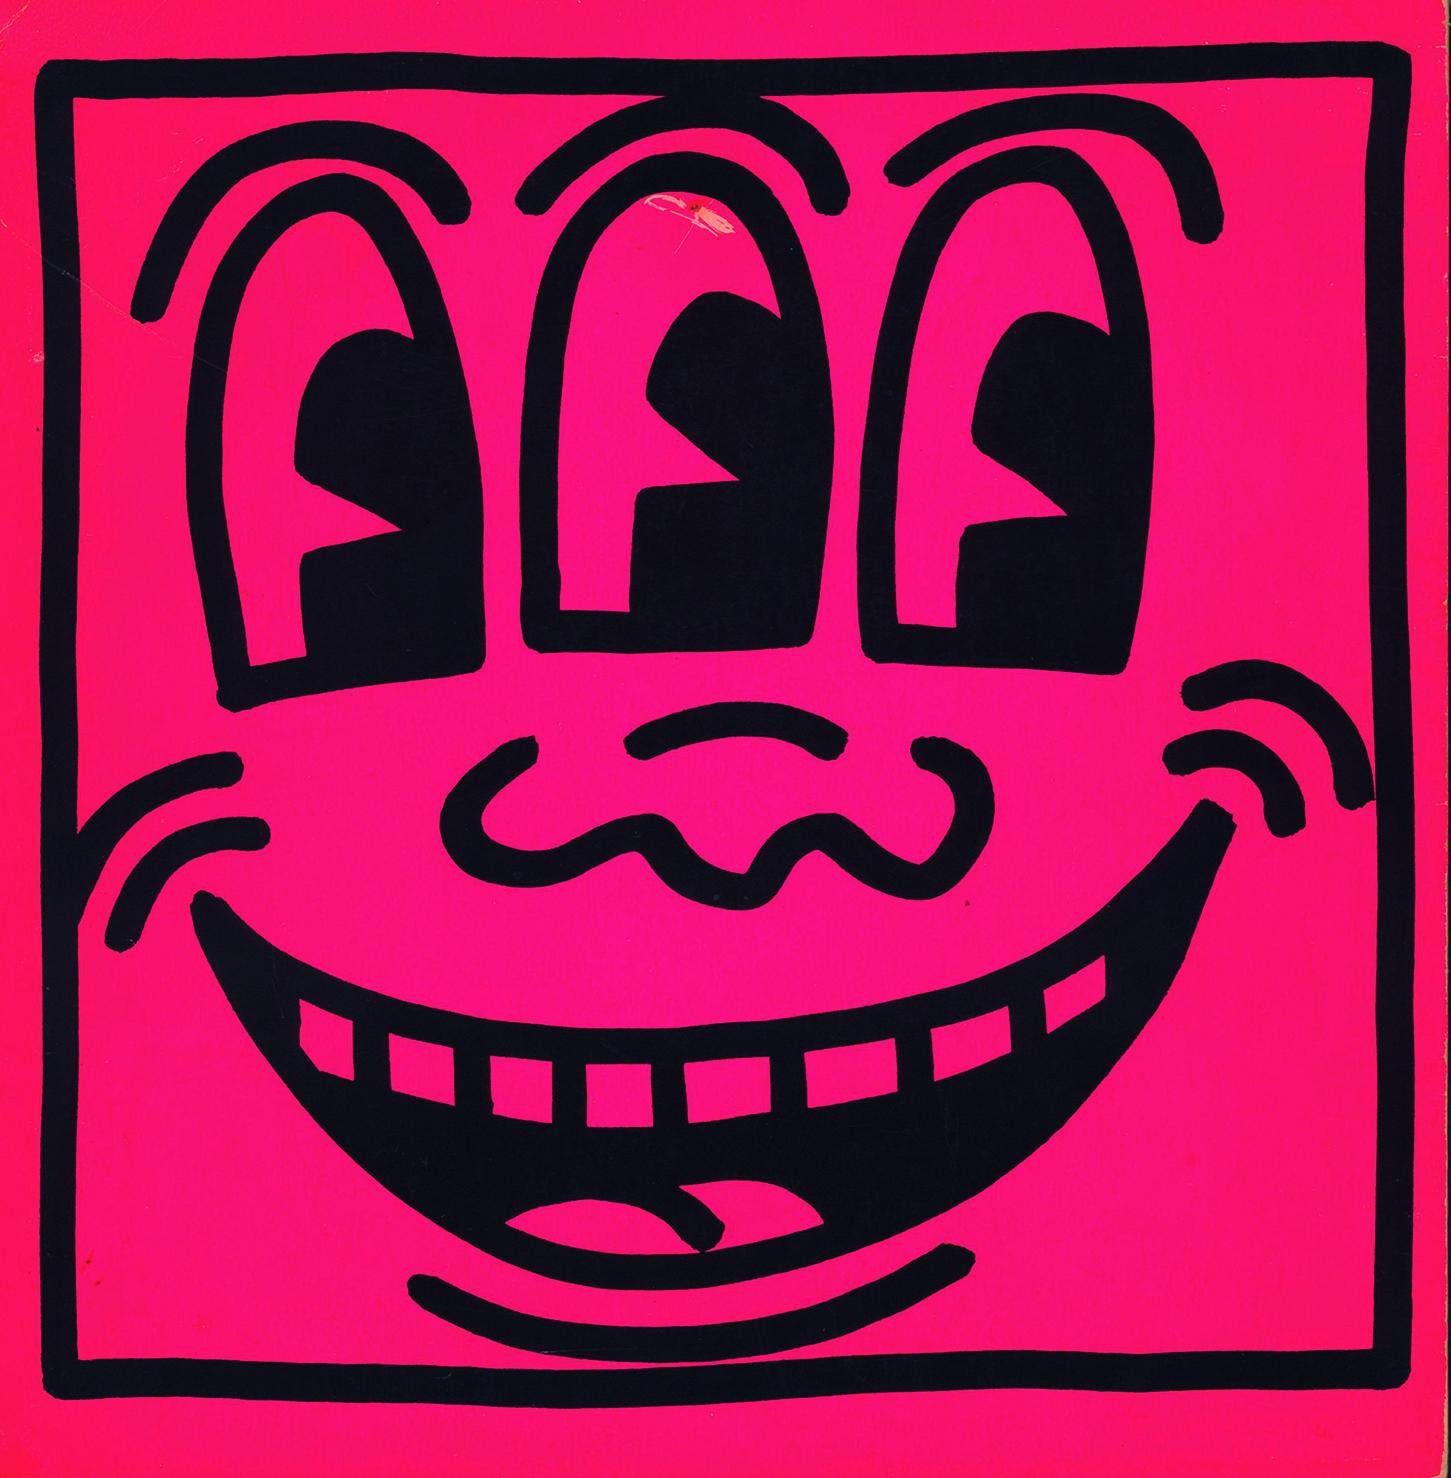 Keith Haring cover art 1982 (Keith Haring Three Eyed face)  - Print by (after) Keith Haring